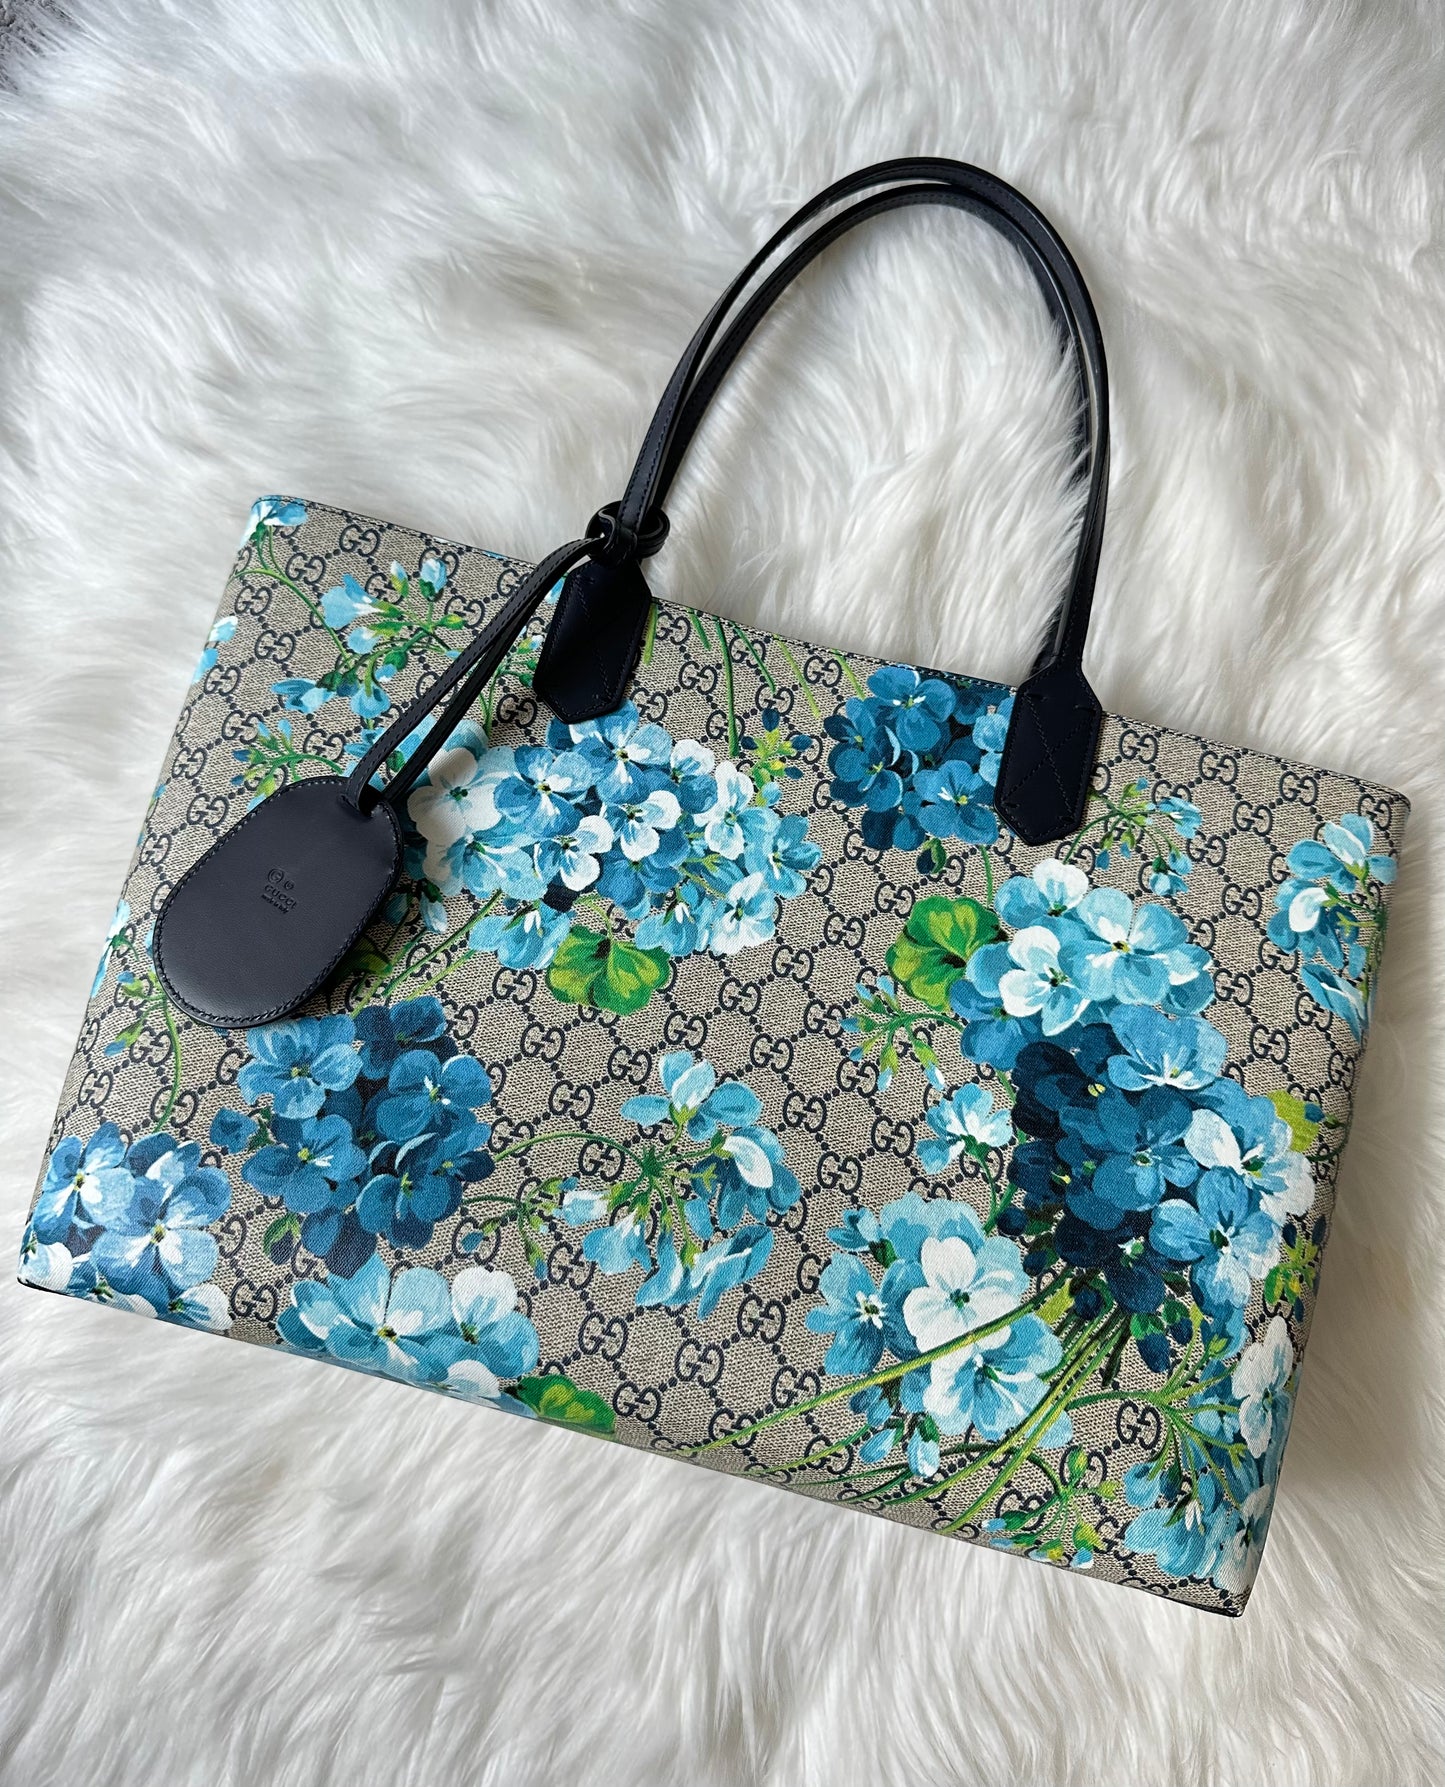 Pre-owned Authentic Gucci GG Supreme Monogram Blooms Print Reversible Blue Tote Shoulder Bag